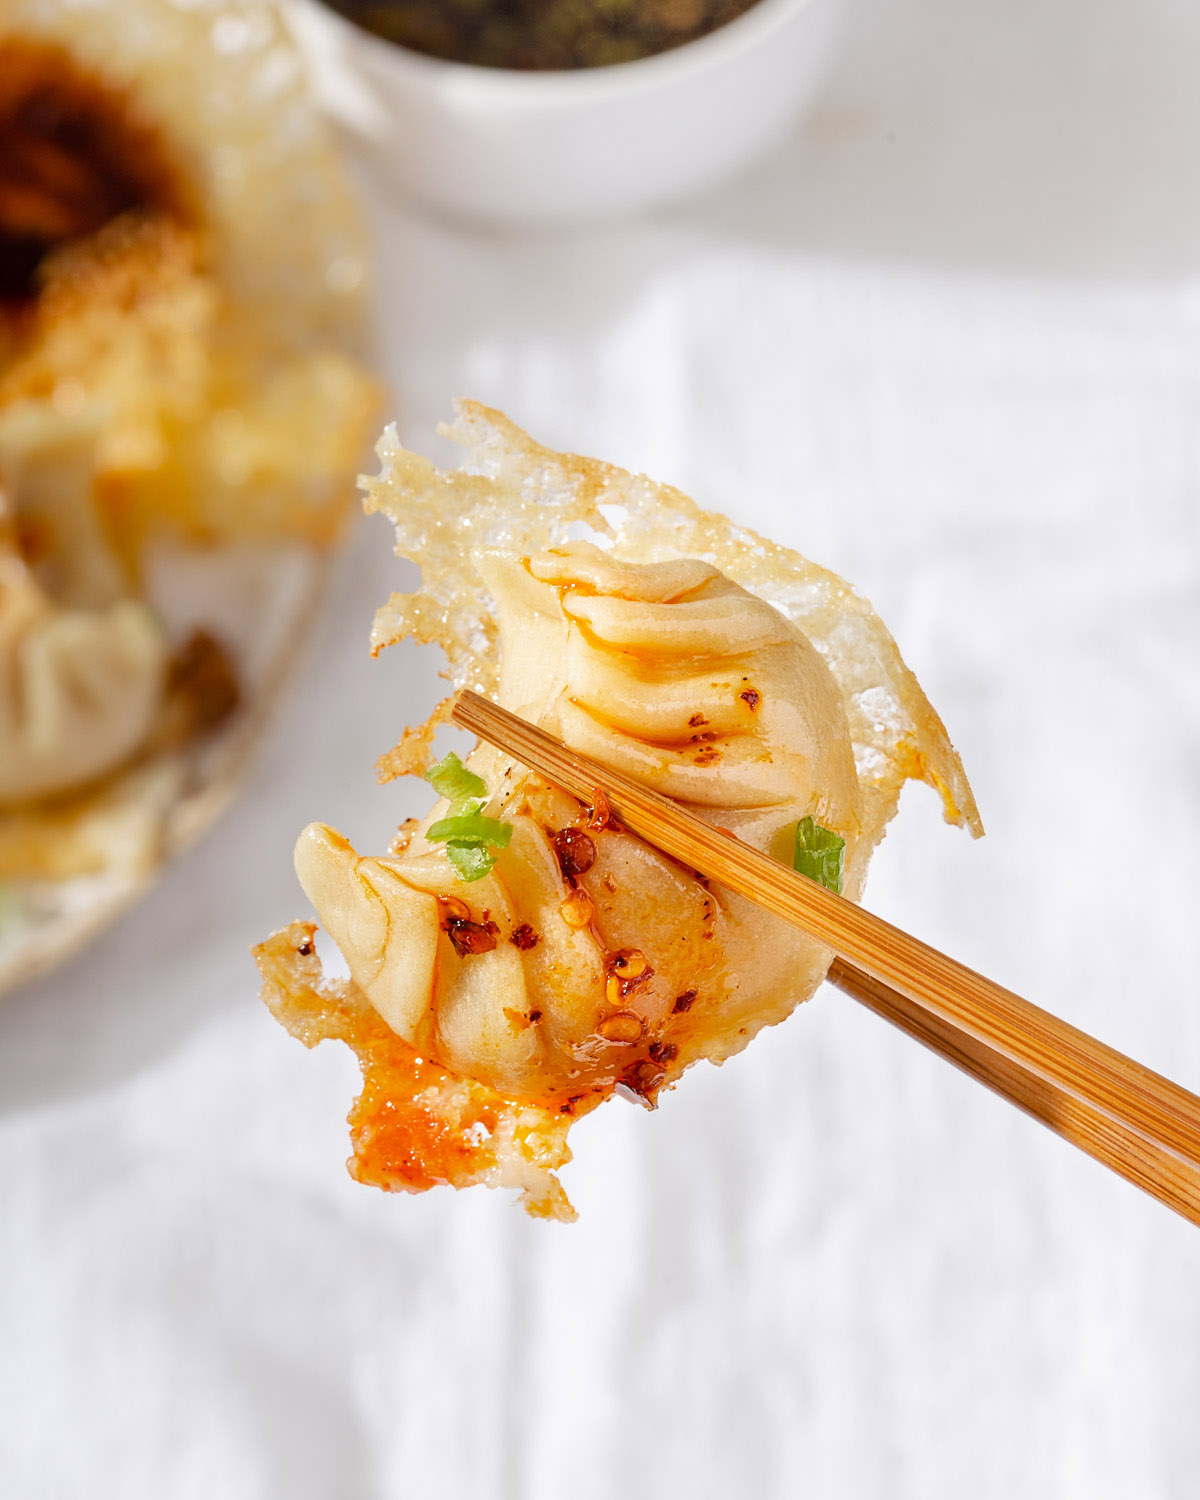 Holding up a crispy dumpling closely with a pair of chopsticks